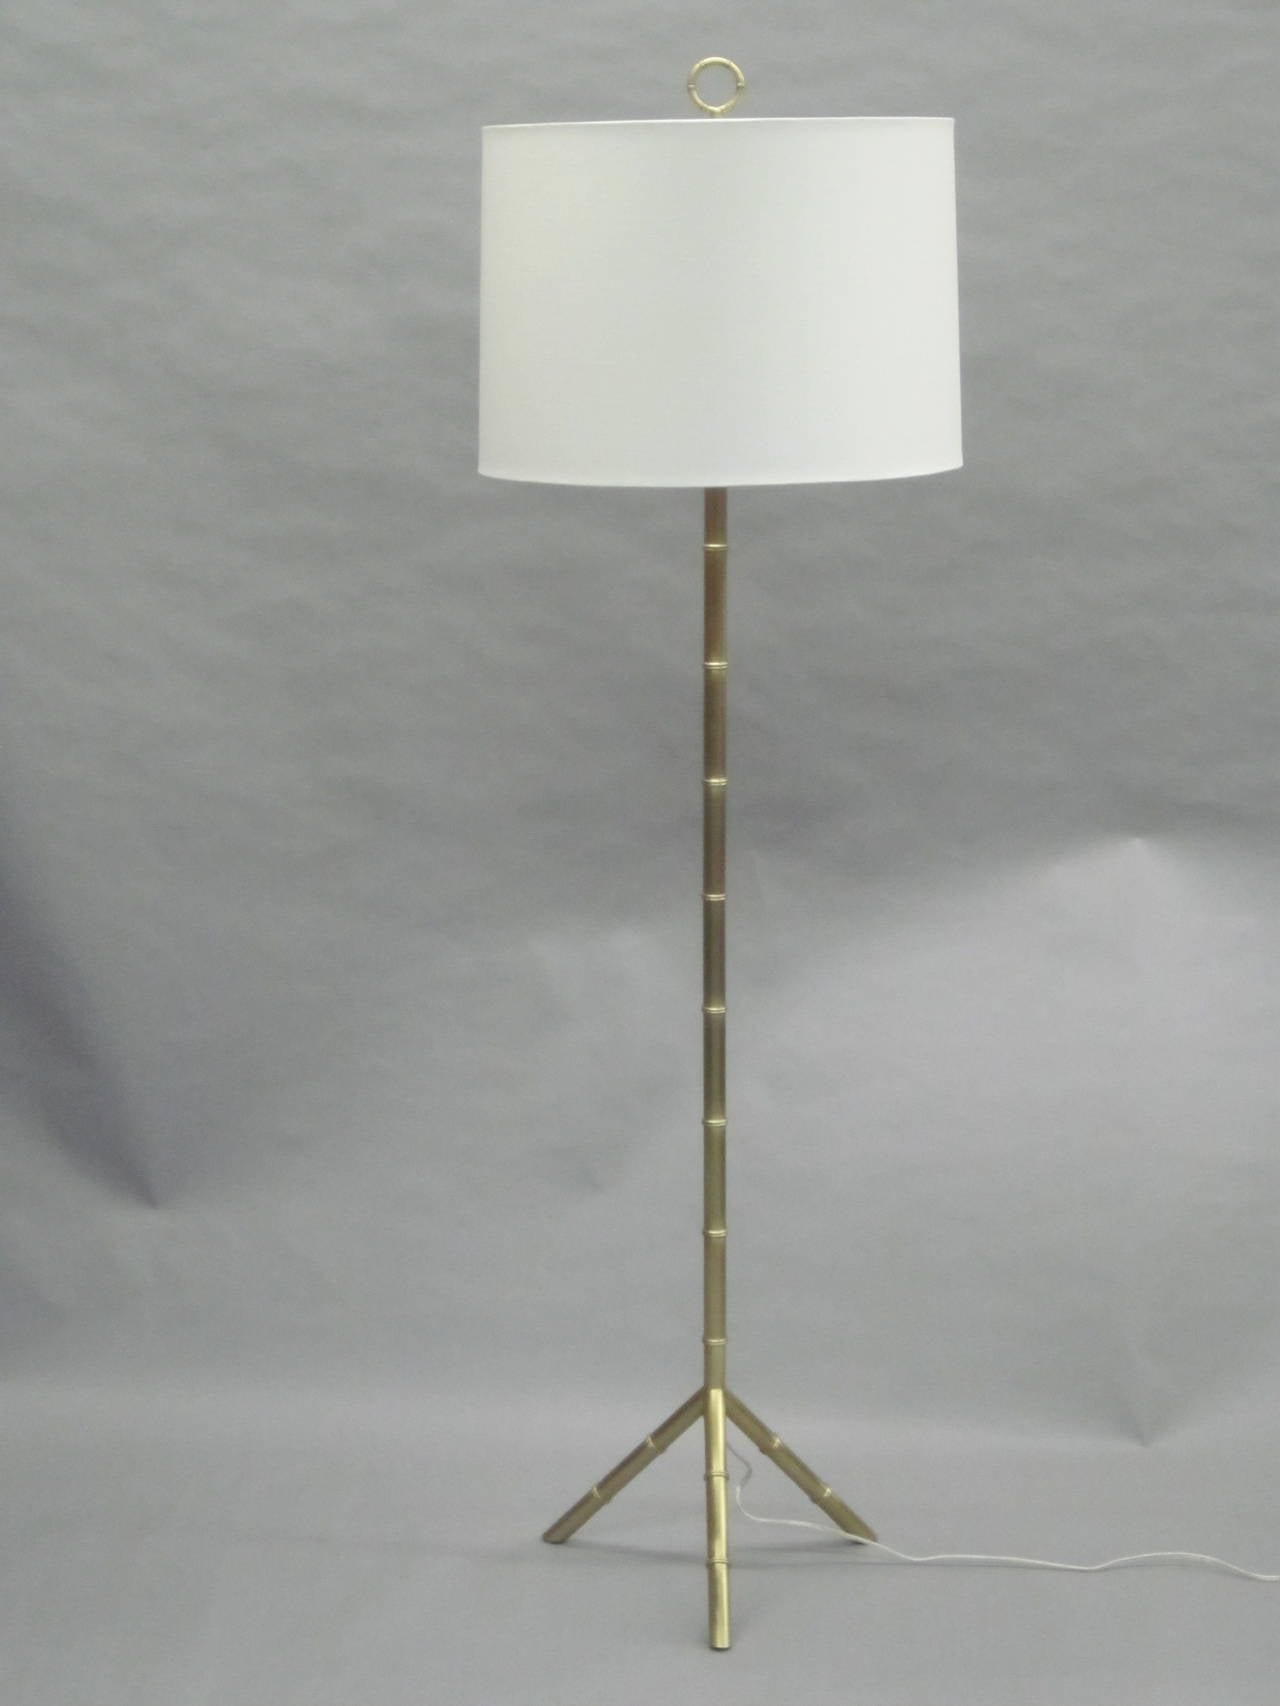 Pair of French Mid-Century style brass faux bamboo standing lamps based on models by Jacques Adnet and Maison Bagues. Each resting on a brass tripod base and having a brass stem that contains one Edison socket rated up to 150 watts, cotton shade and